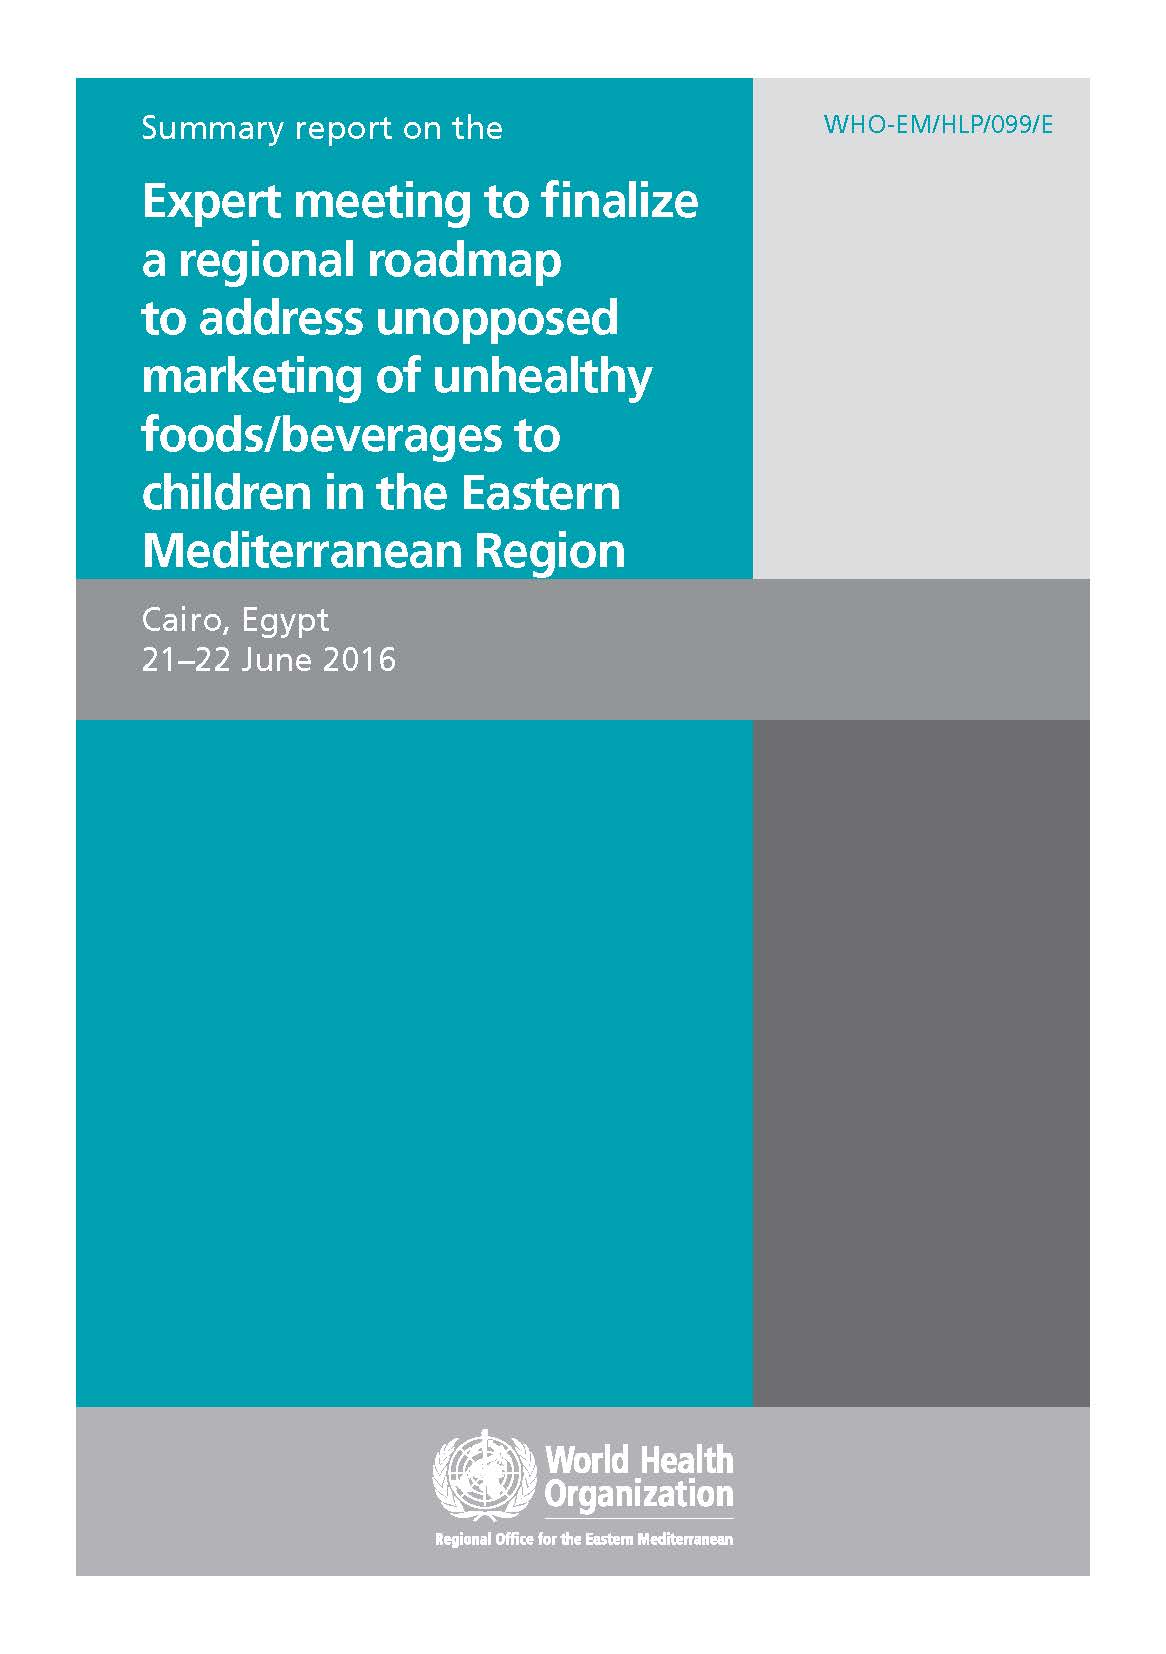 Summary report Unopposed marketing of unhealthy foods meeting